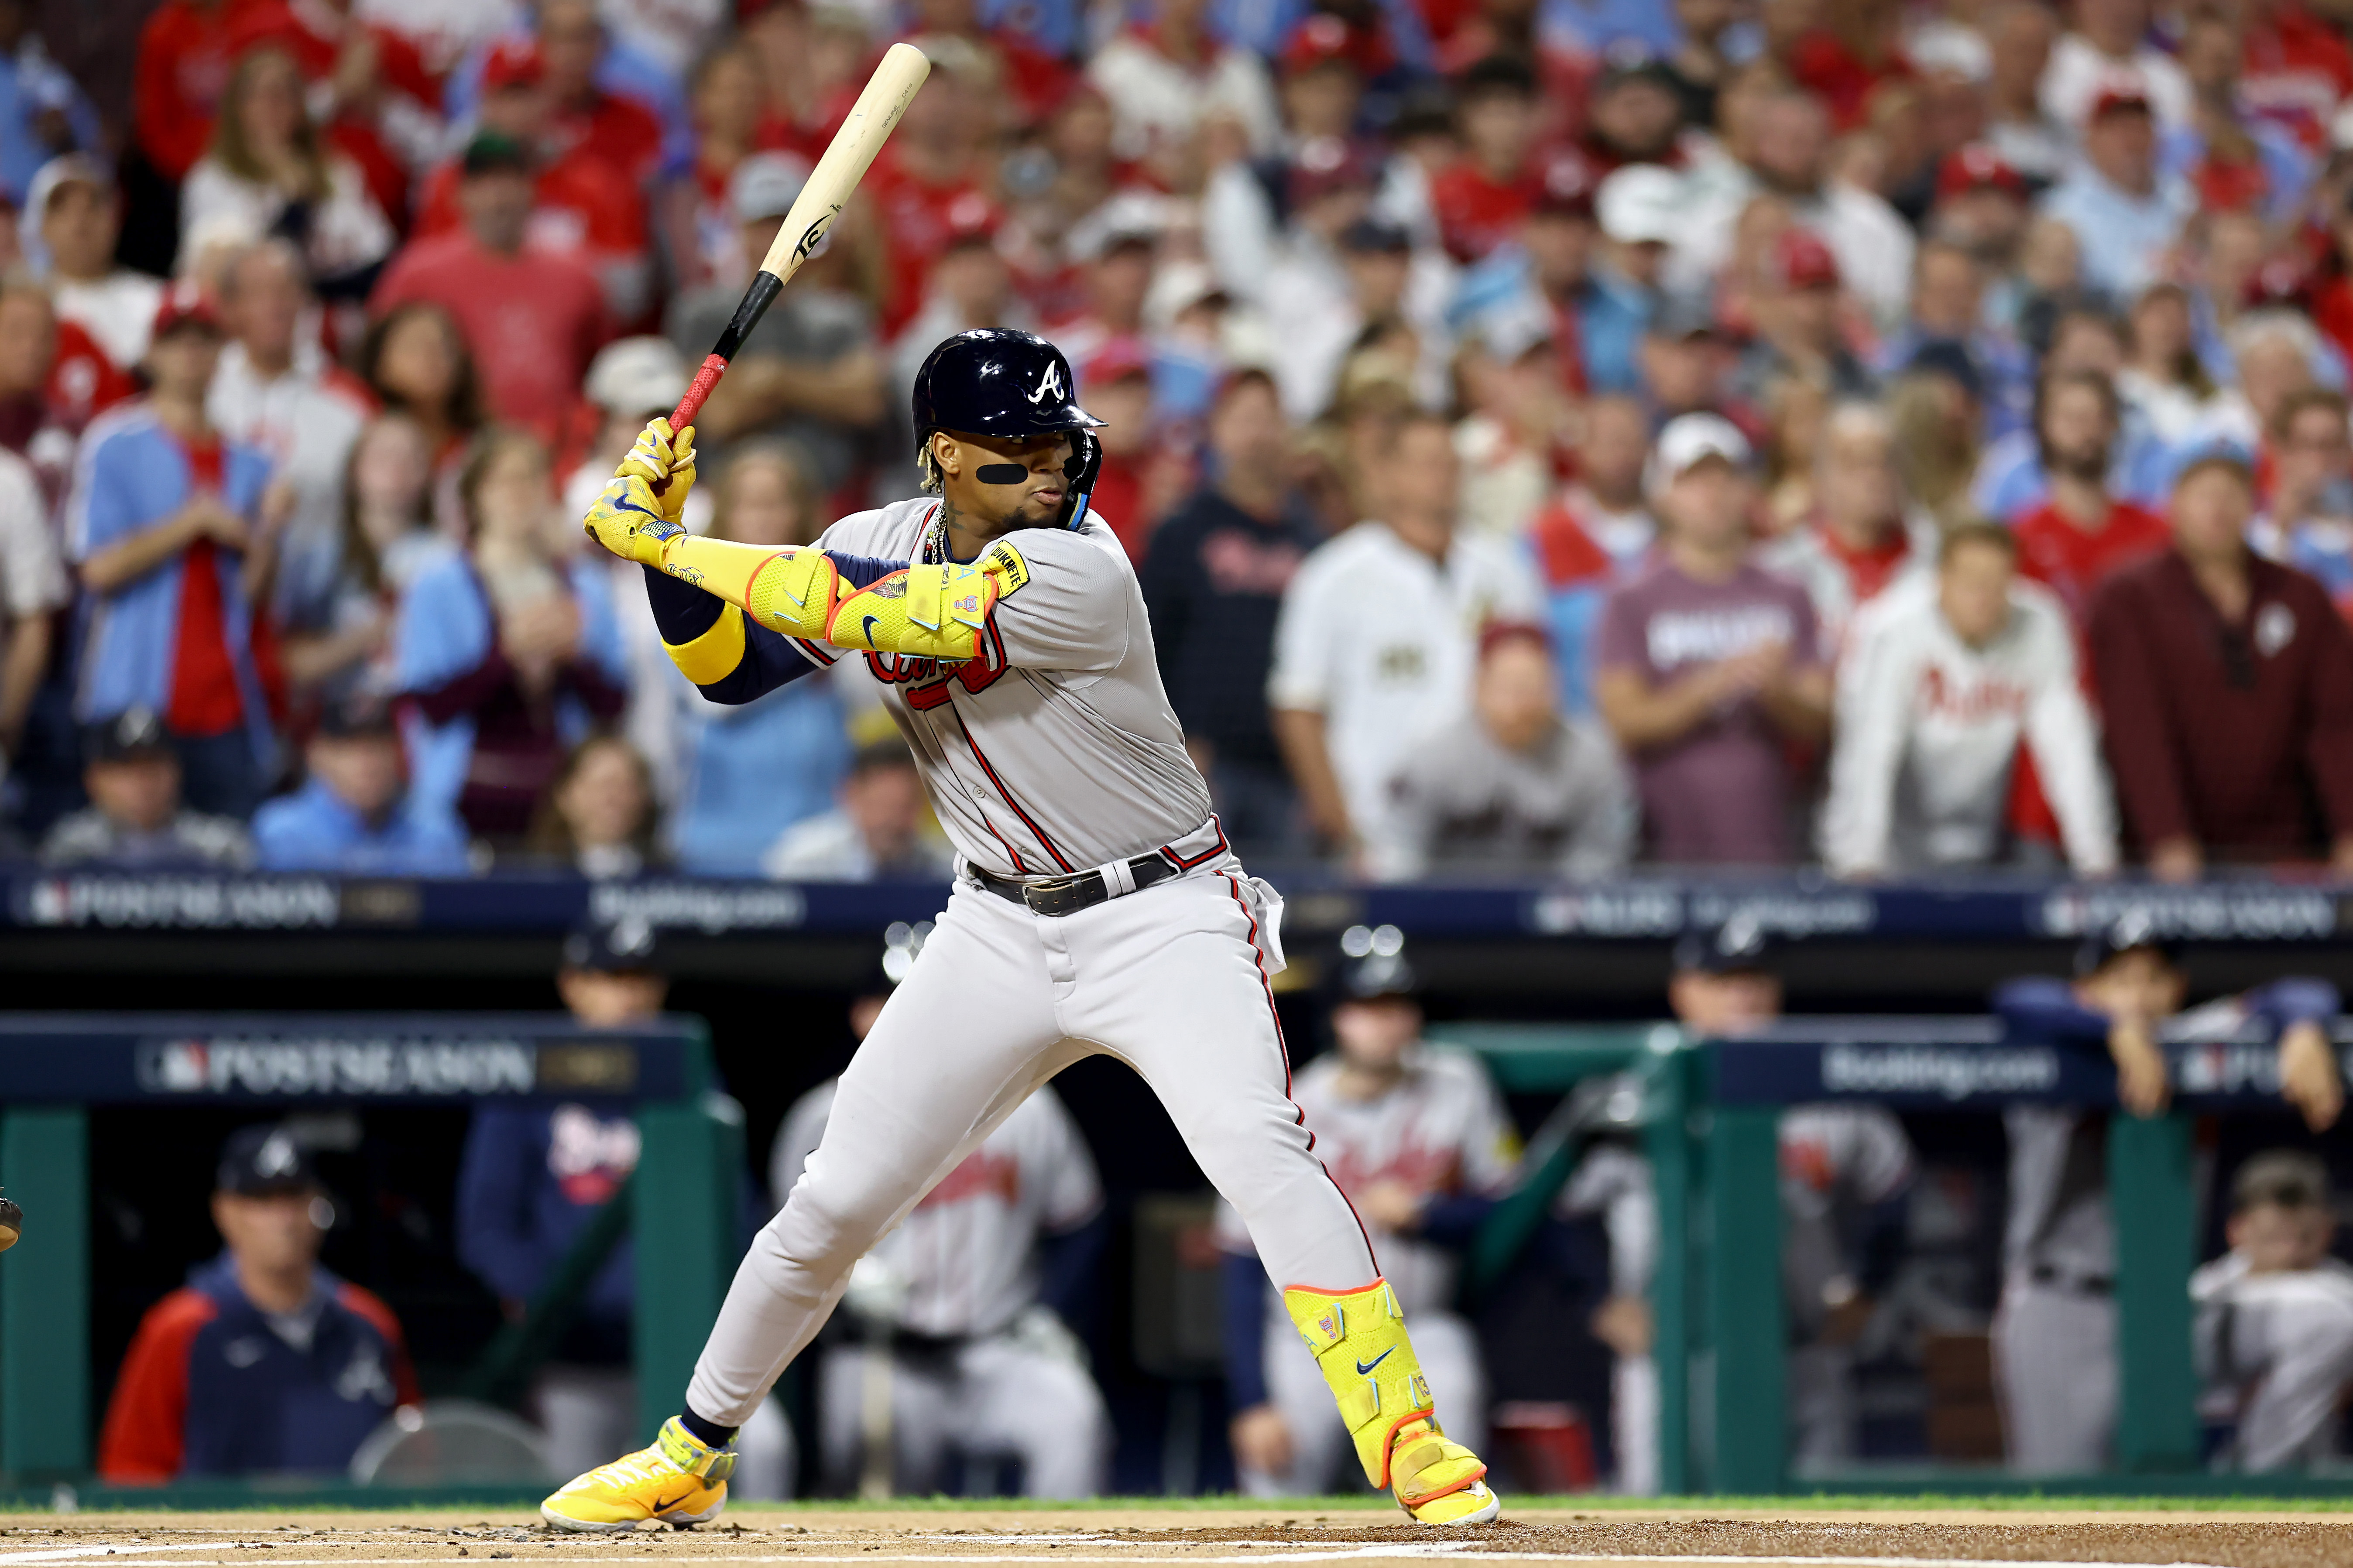 Troubles Behind Him, Marcell Ozuna Shows Atlanta Braves His Swing